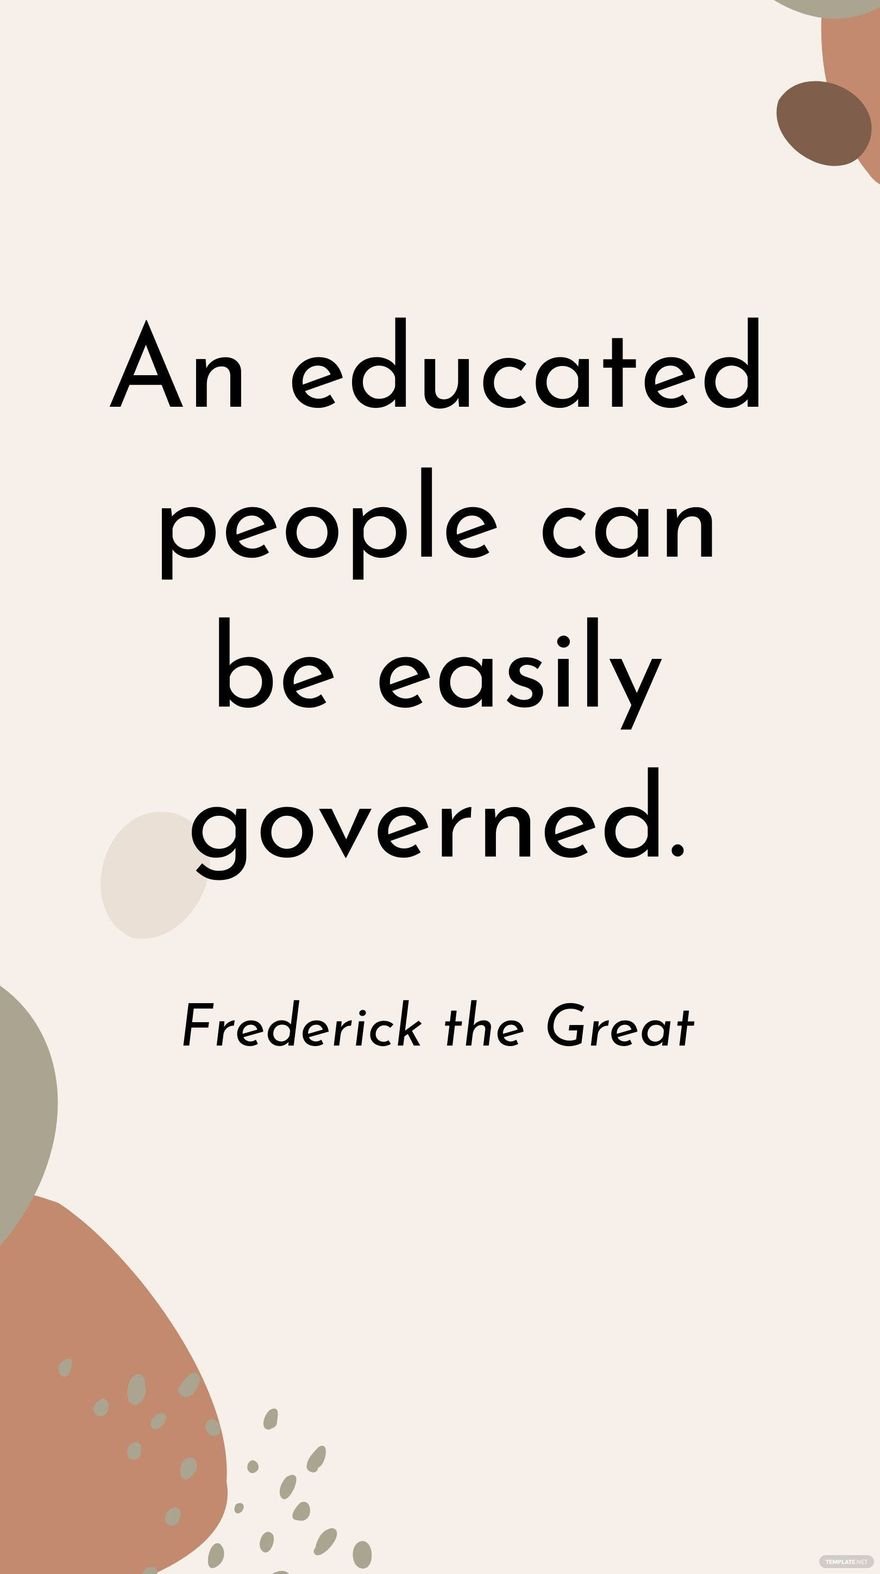 Free Frederick the Great - An educated people can be easily governed.